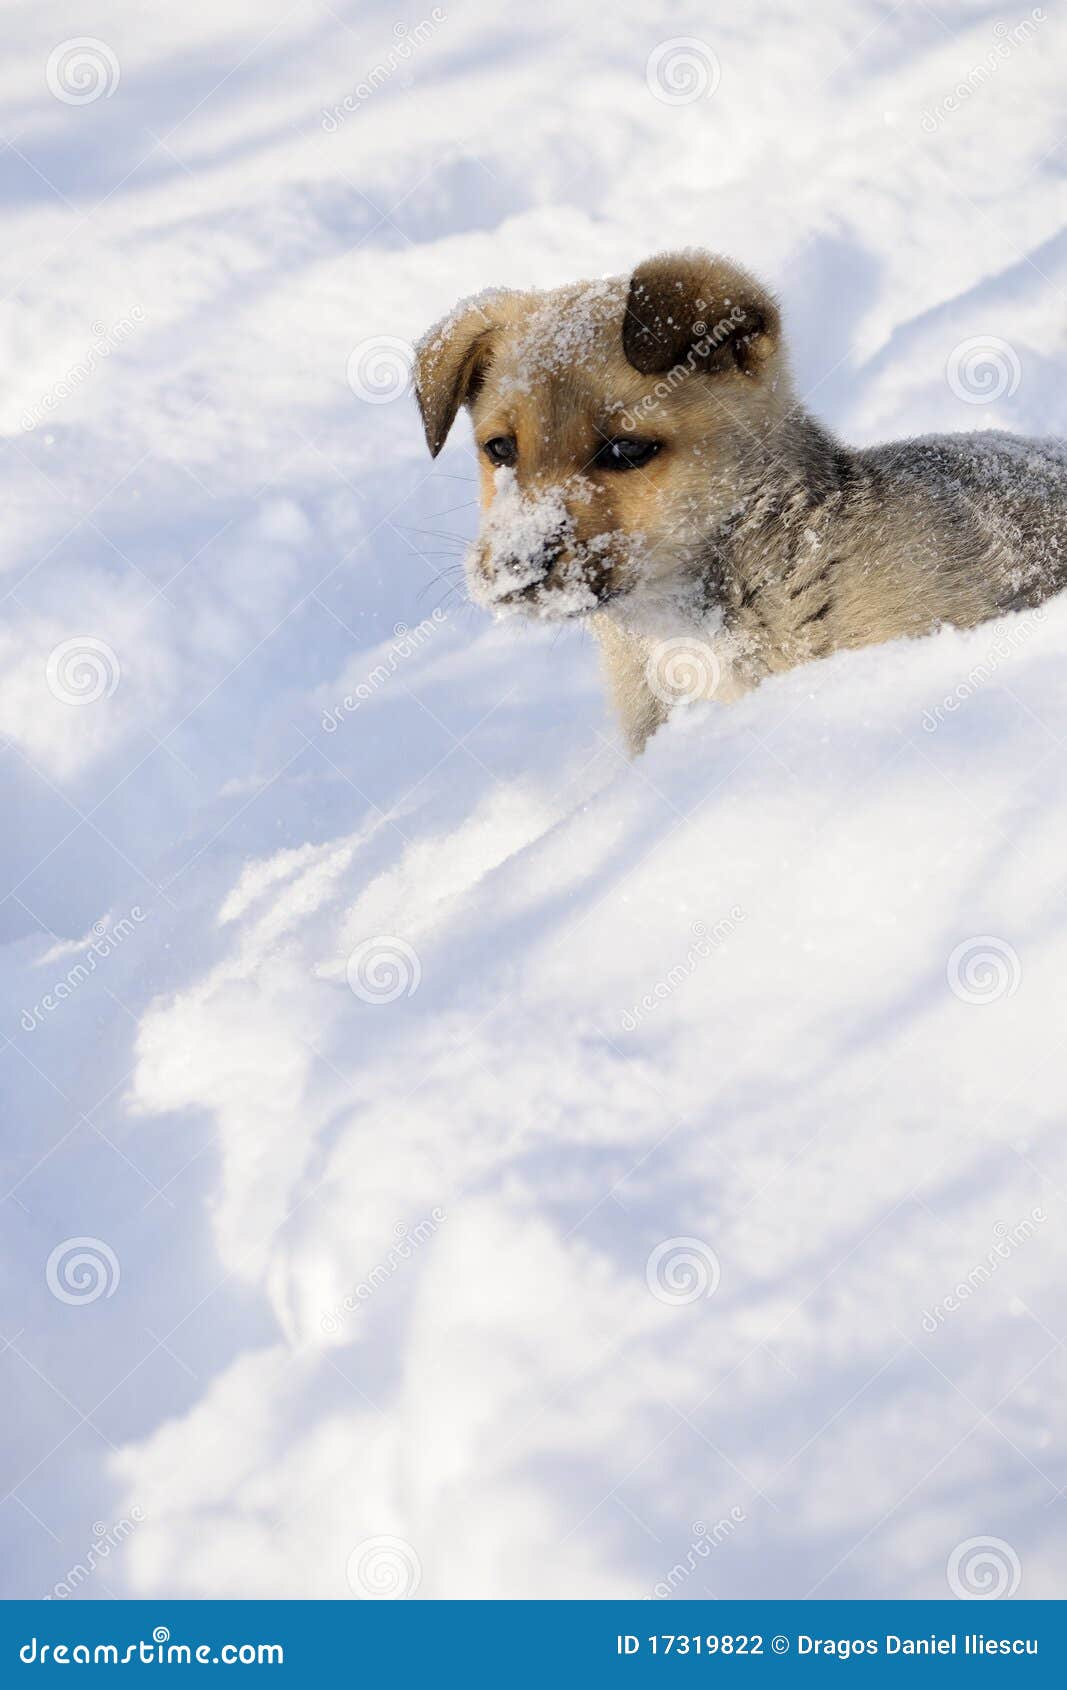 Animal playing in snow stock photo. Image of winter, playful - 17319822